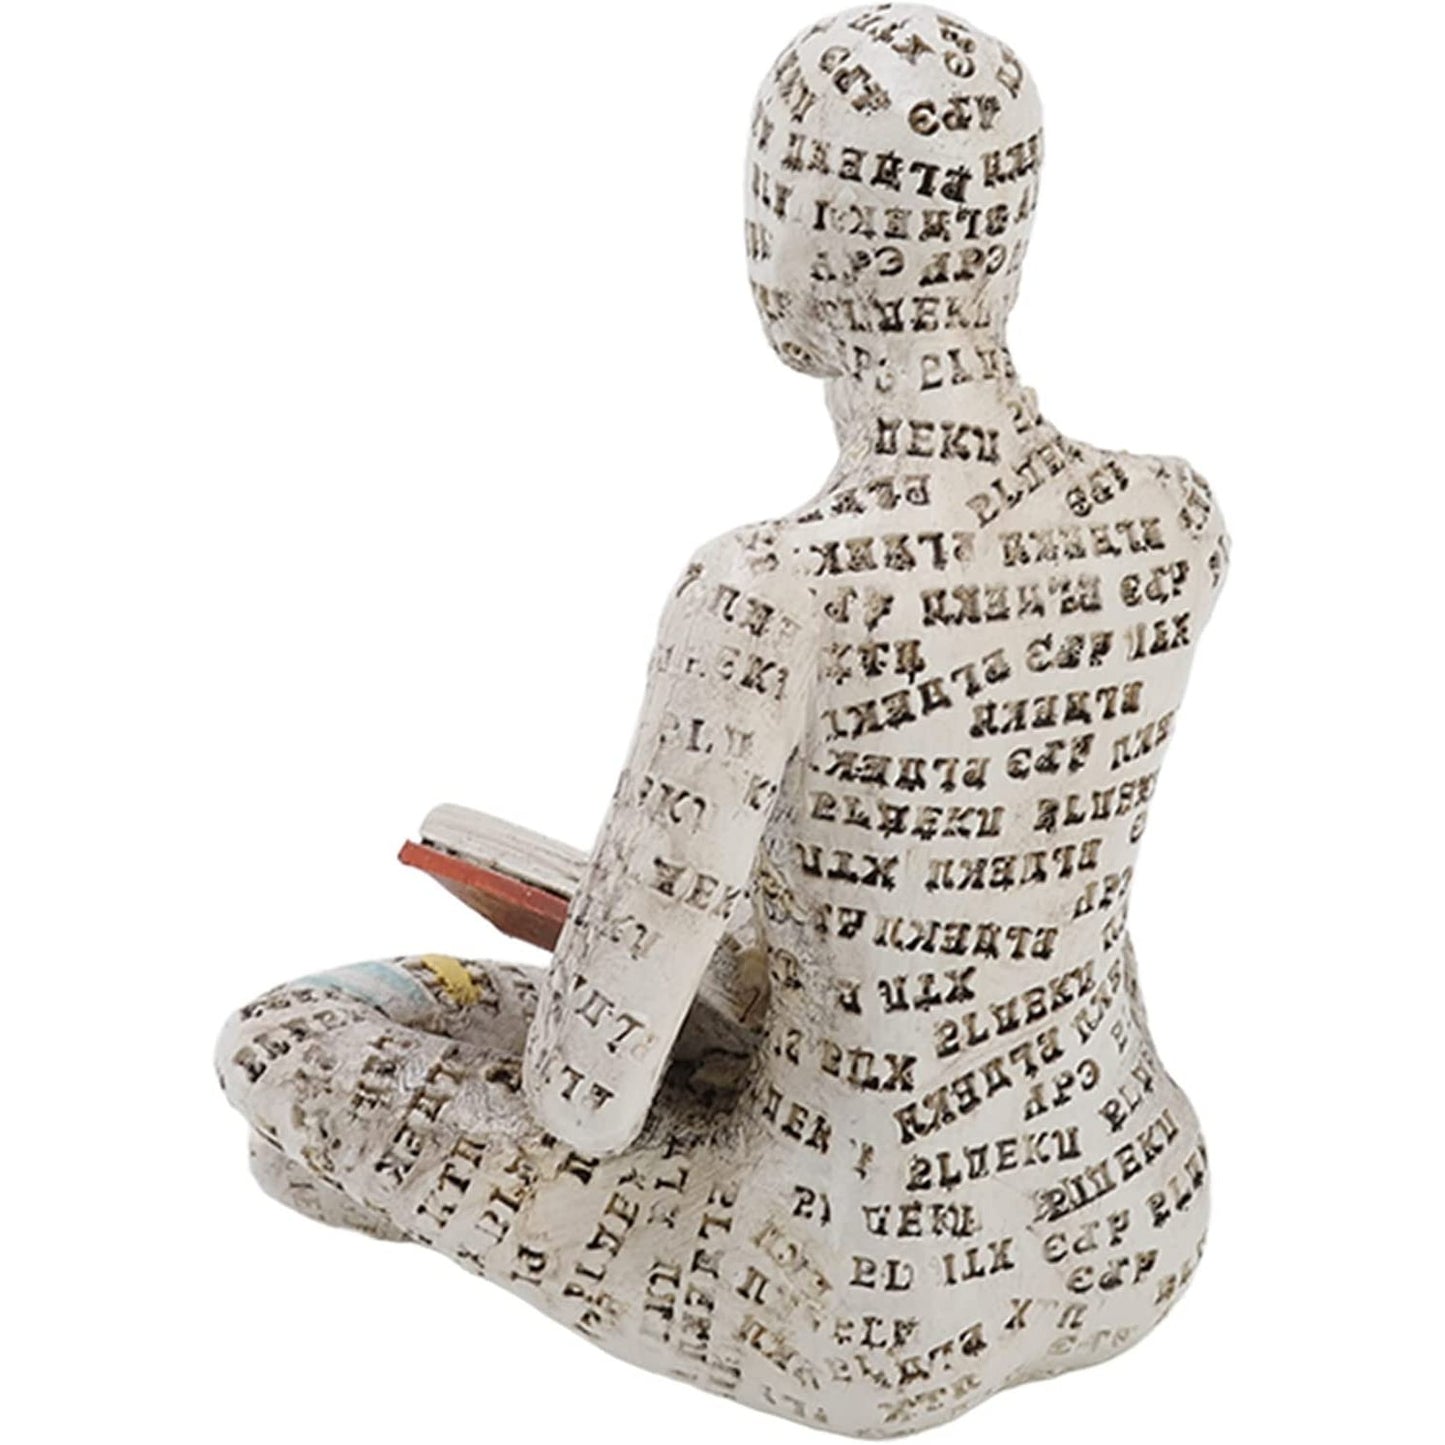 The back of a female sculpture. It looks like her body is wrapped in book pages.